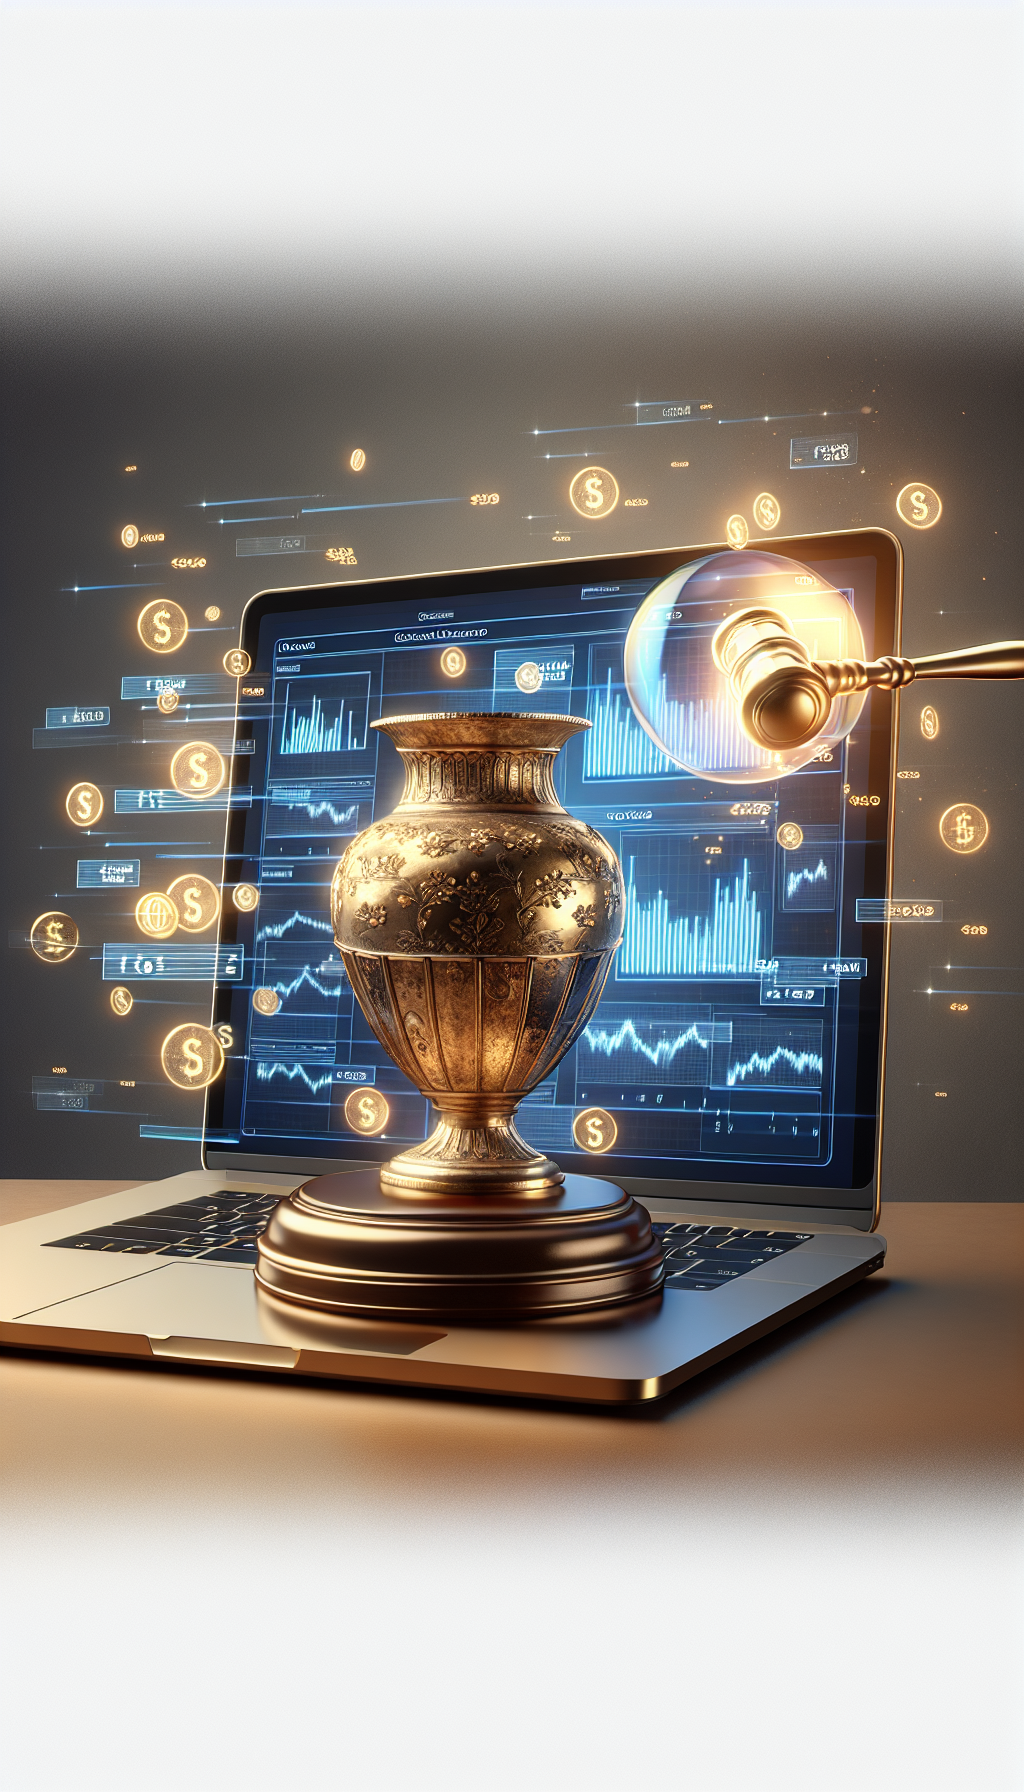 A sleek laptop screen casts a glow on a gilded antique vase perched atop an auctioneer's pedestal. Digital appraisal charts and currency symbols ascend like auction bids in a bubble above the vase, seamlessly morphing into a vibrant, virtual gavel that strikes down amongst a flurry of online bids, capturing the transition from appraisal to profit.